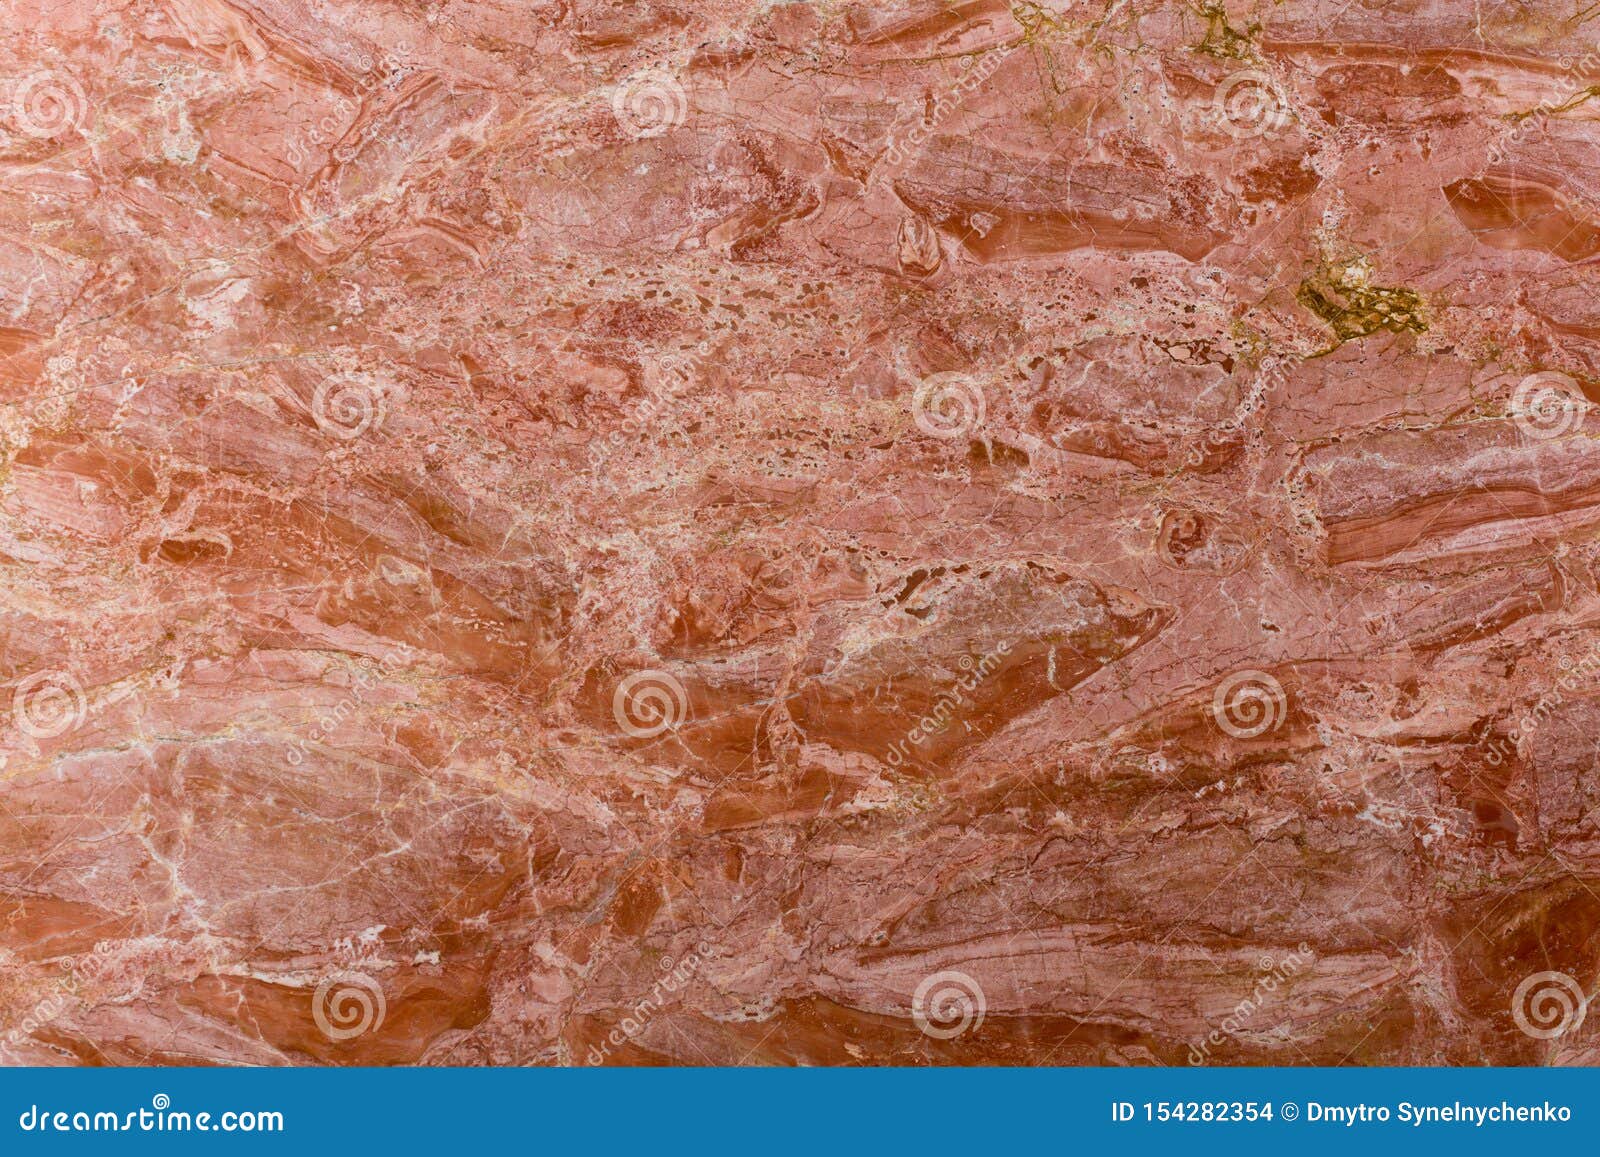 Luxury Natural Red Marble Texture. High Quality Texture In Extremely